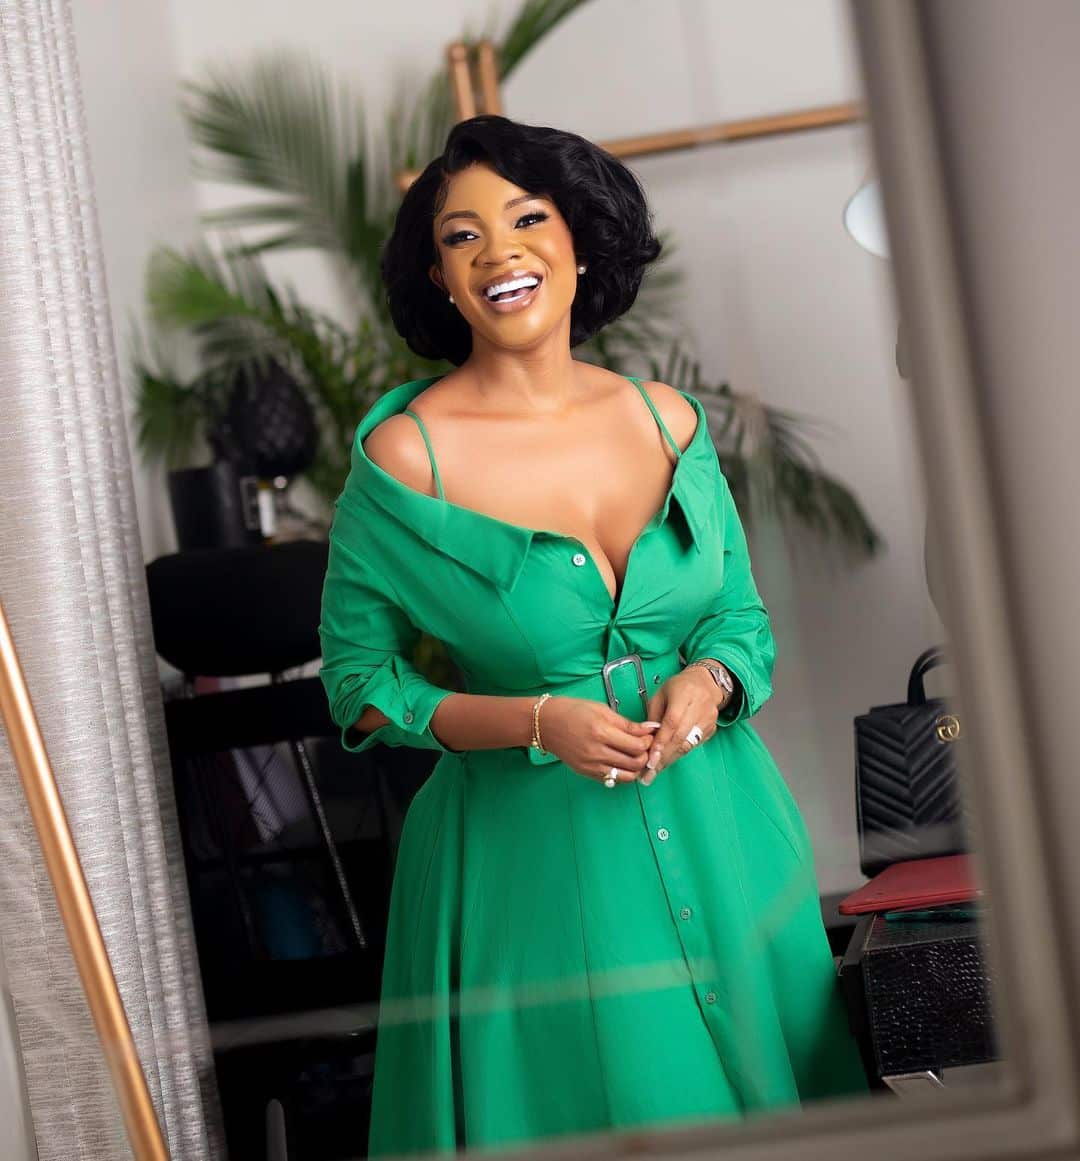 5 years ago, I underestimated the extent of my influence – Popular Ghanaian media personality, Serwaa Amihere finally reacts to her leaked s3x tape